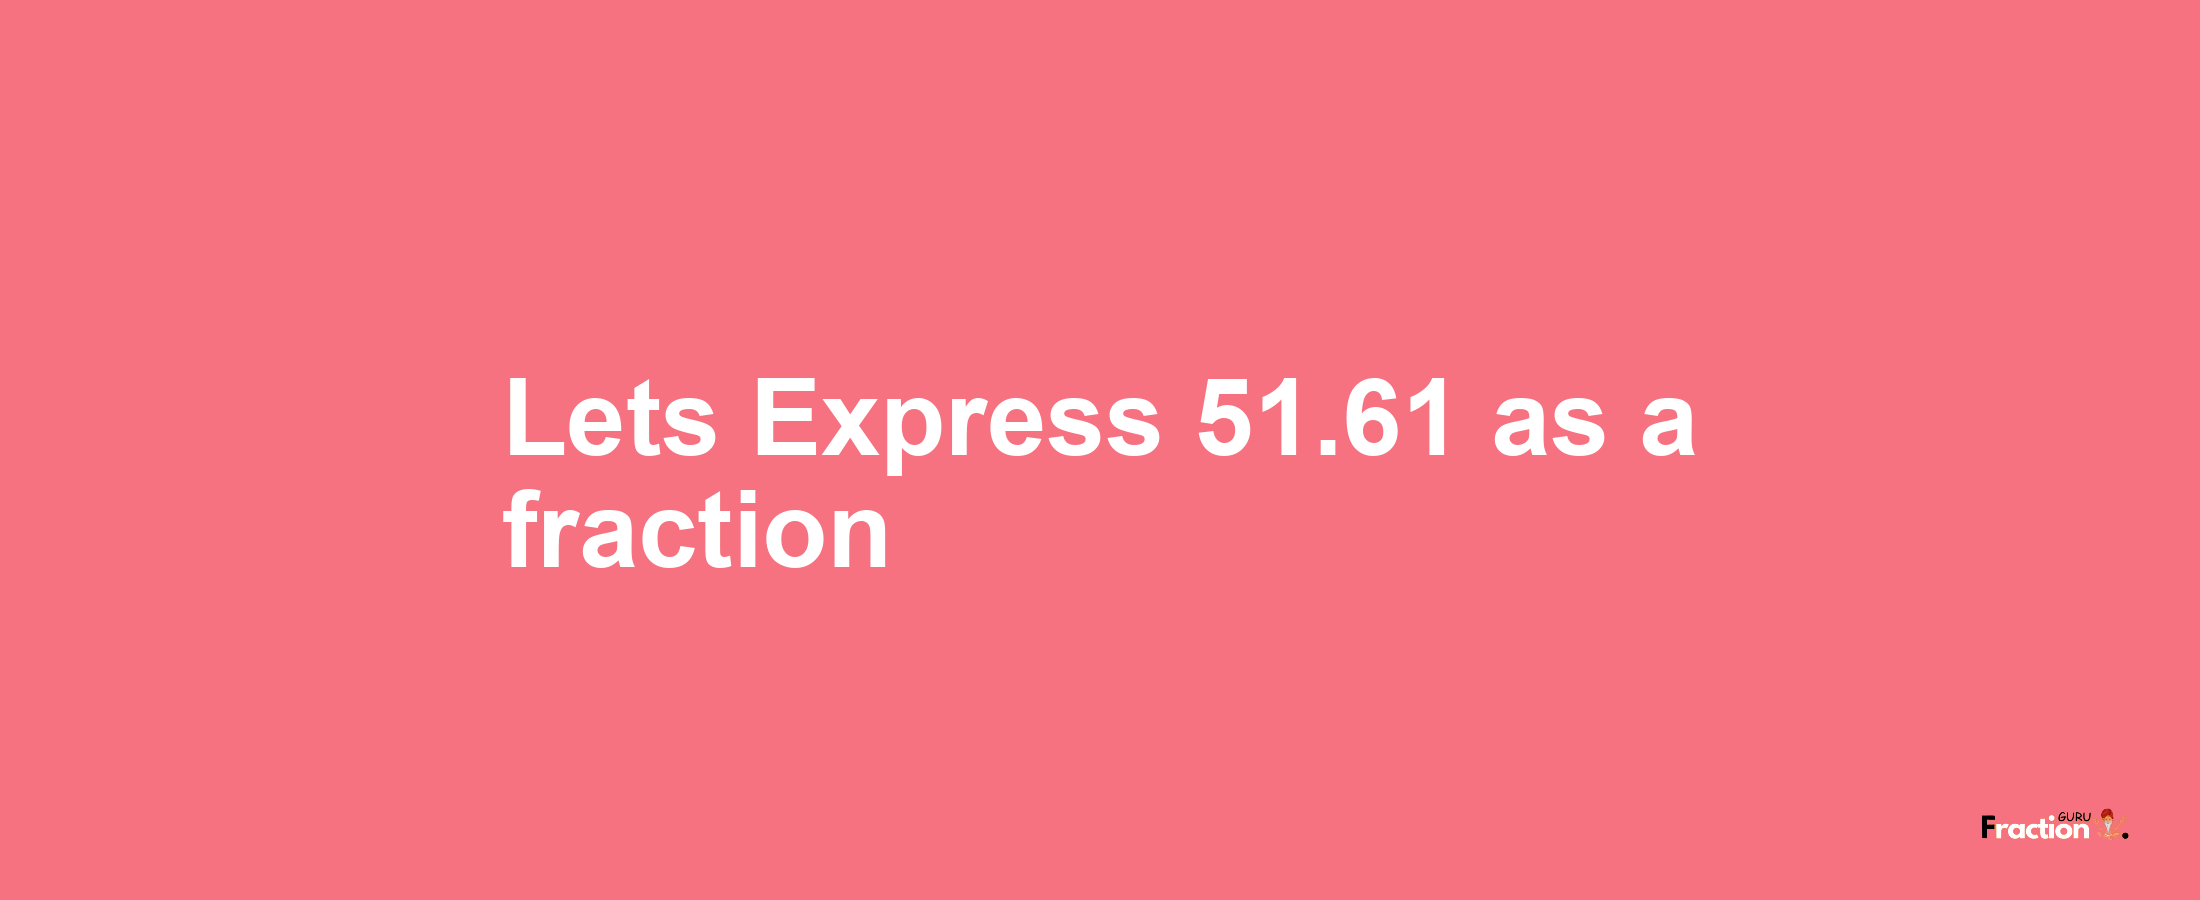 Lets Express 51.61 as afraction